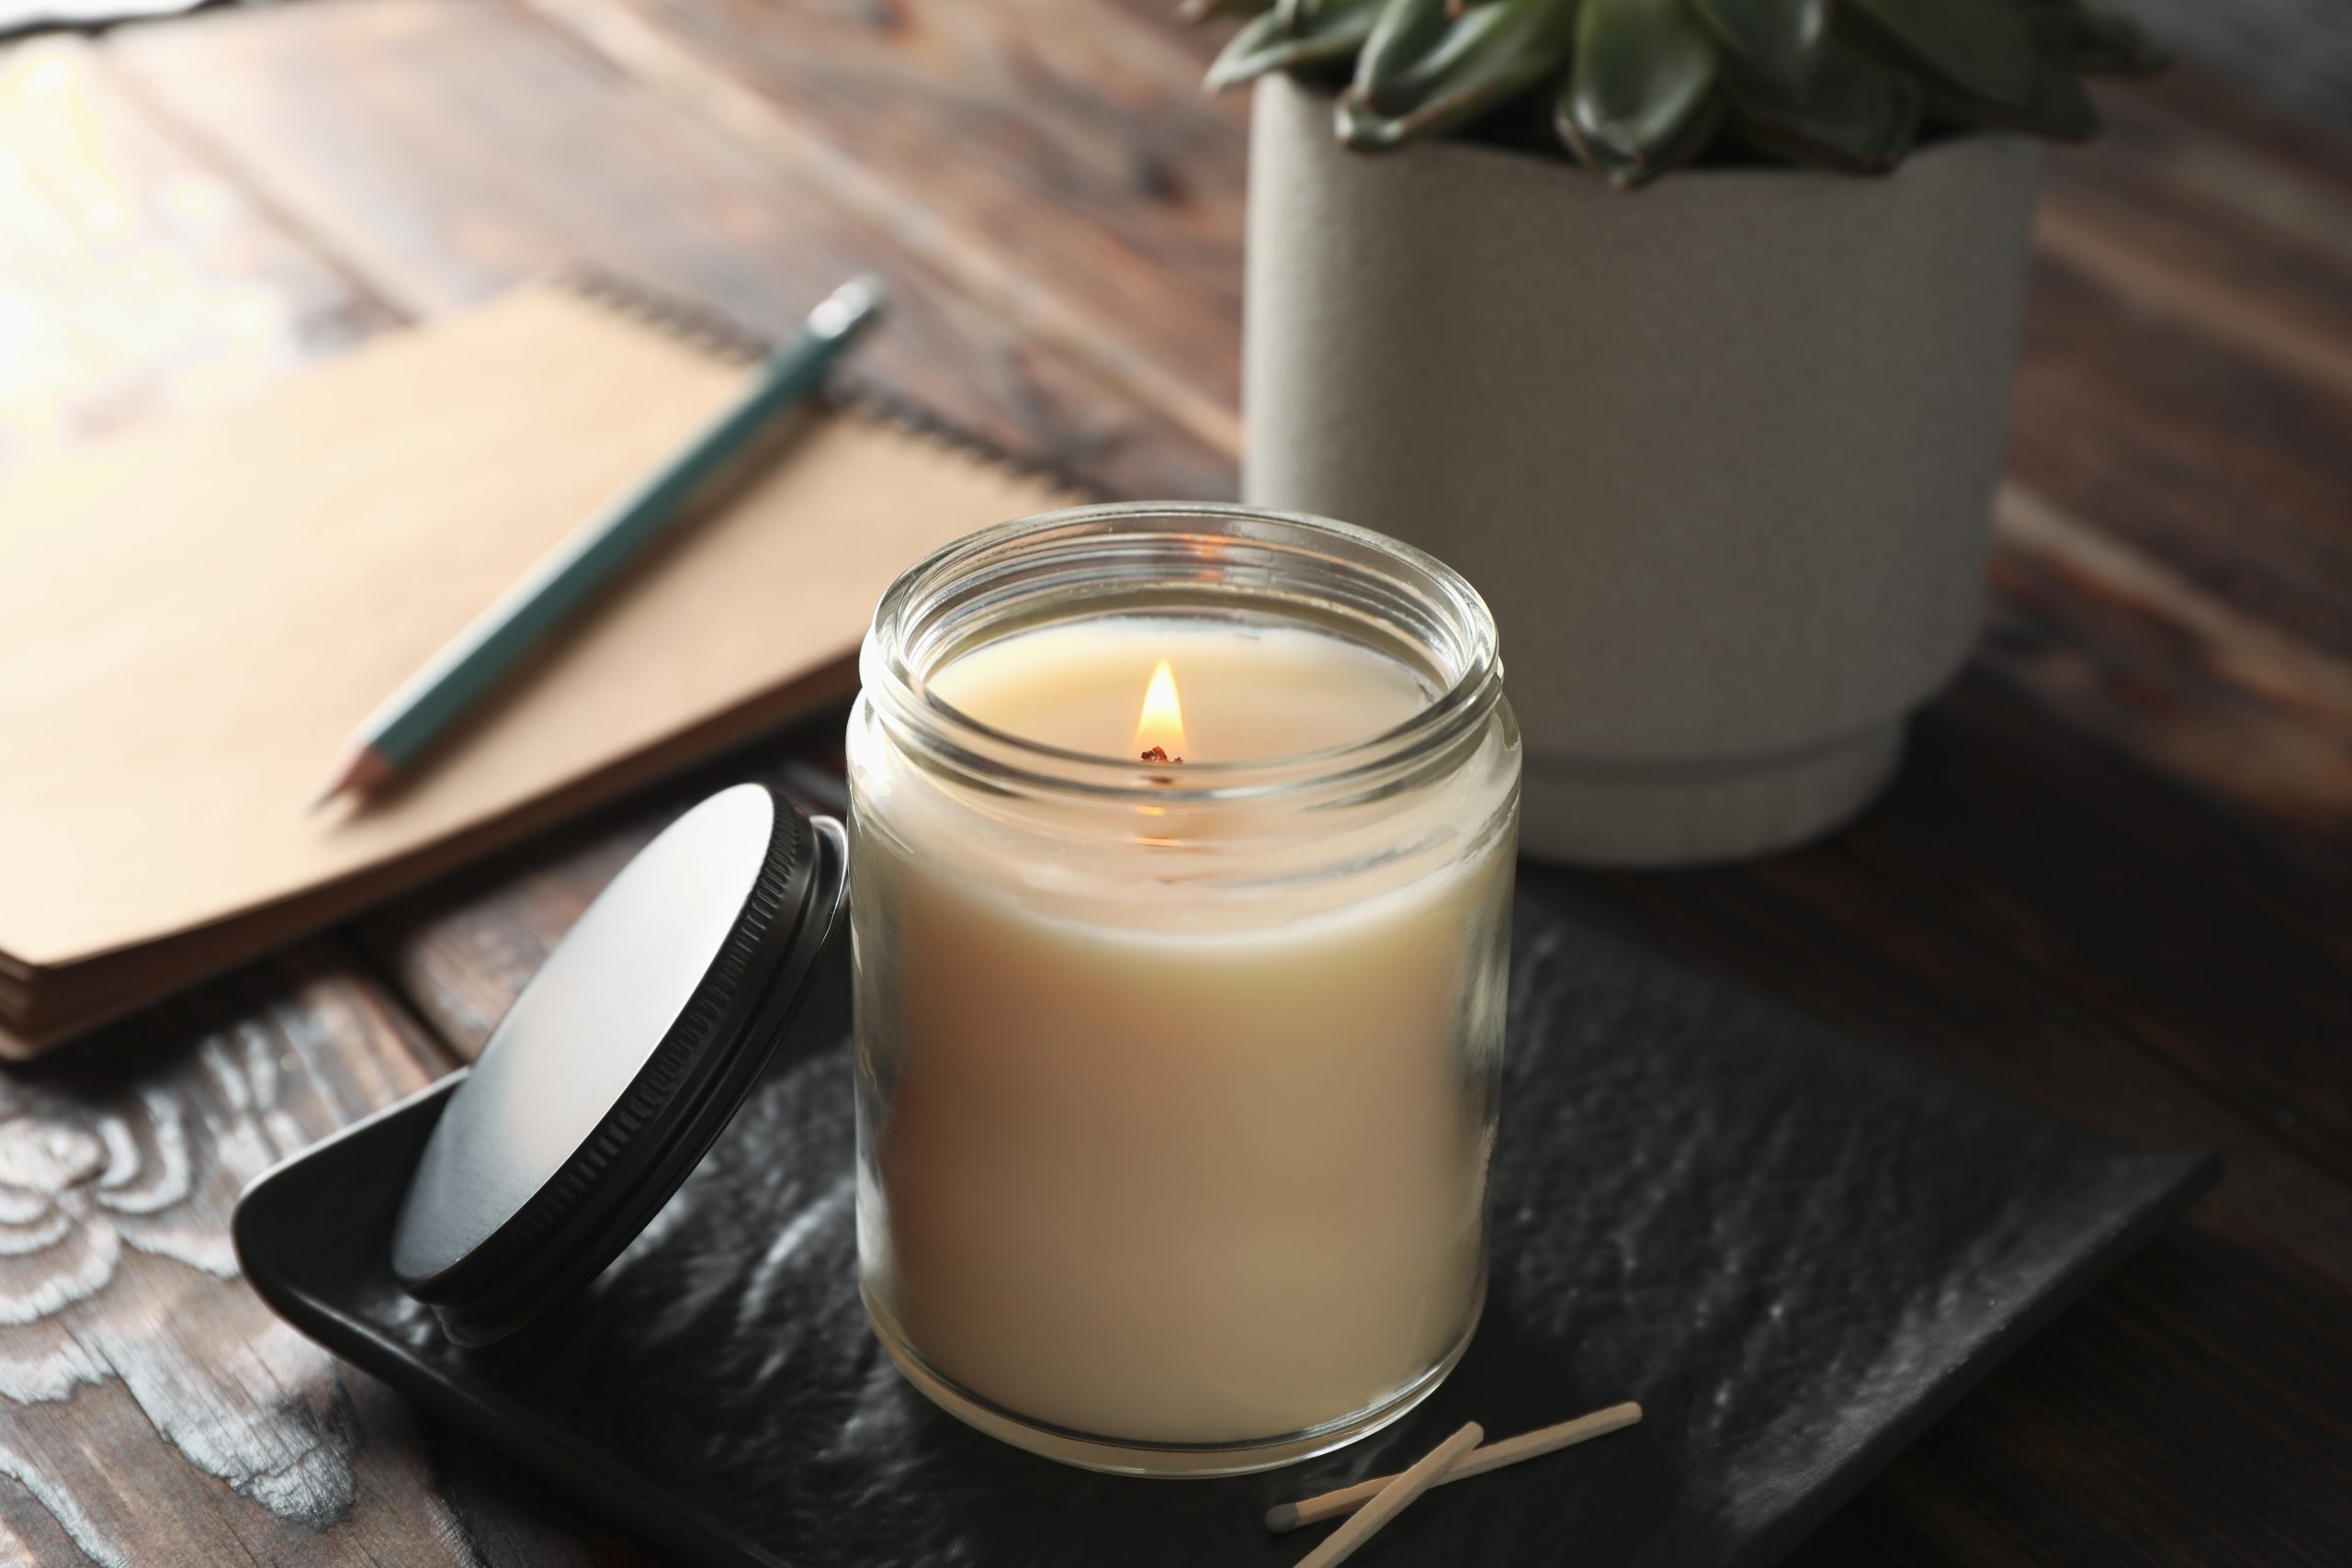 burning aromatherapy candle in a jar